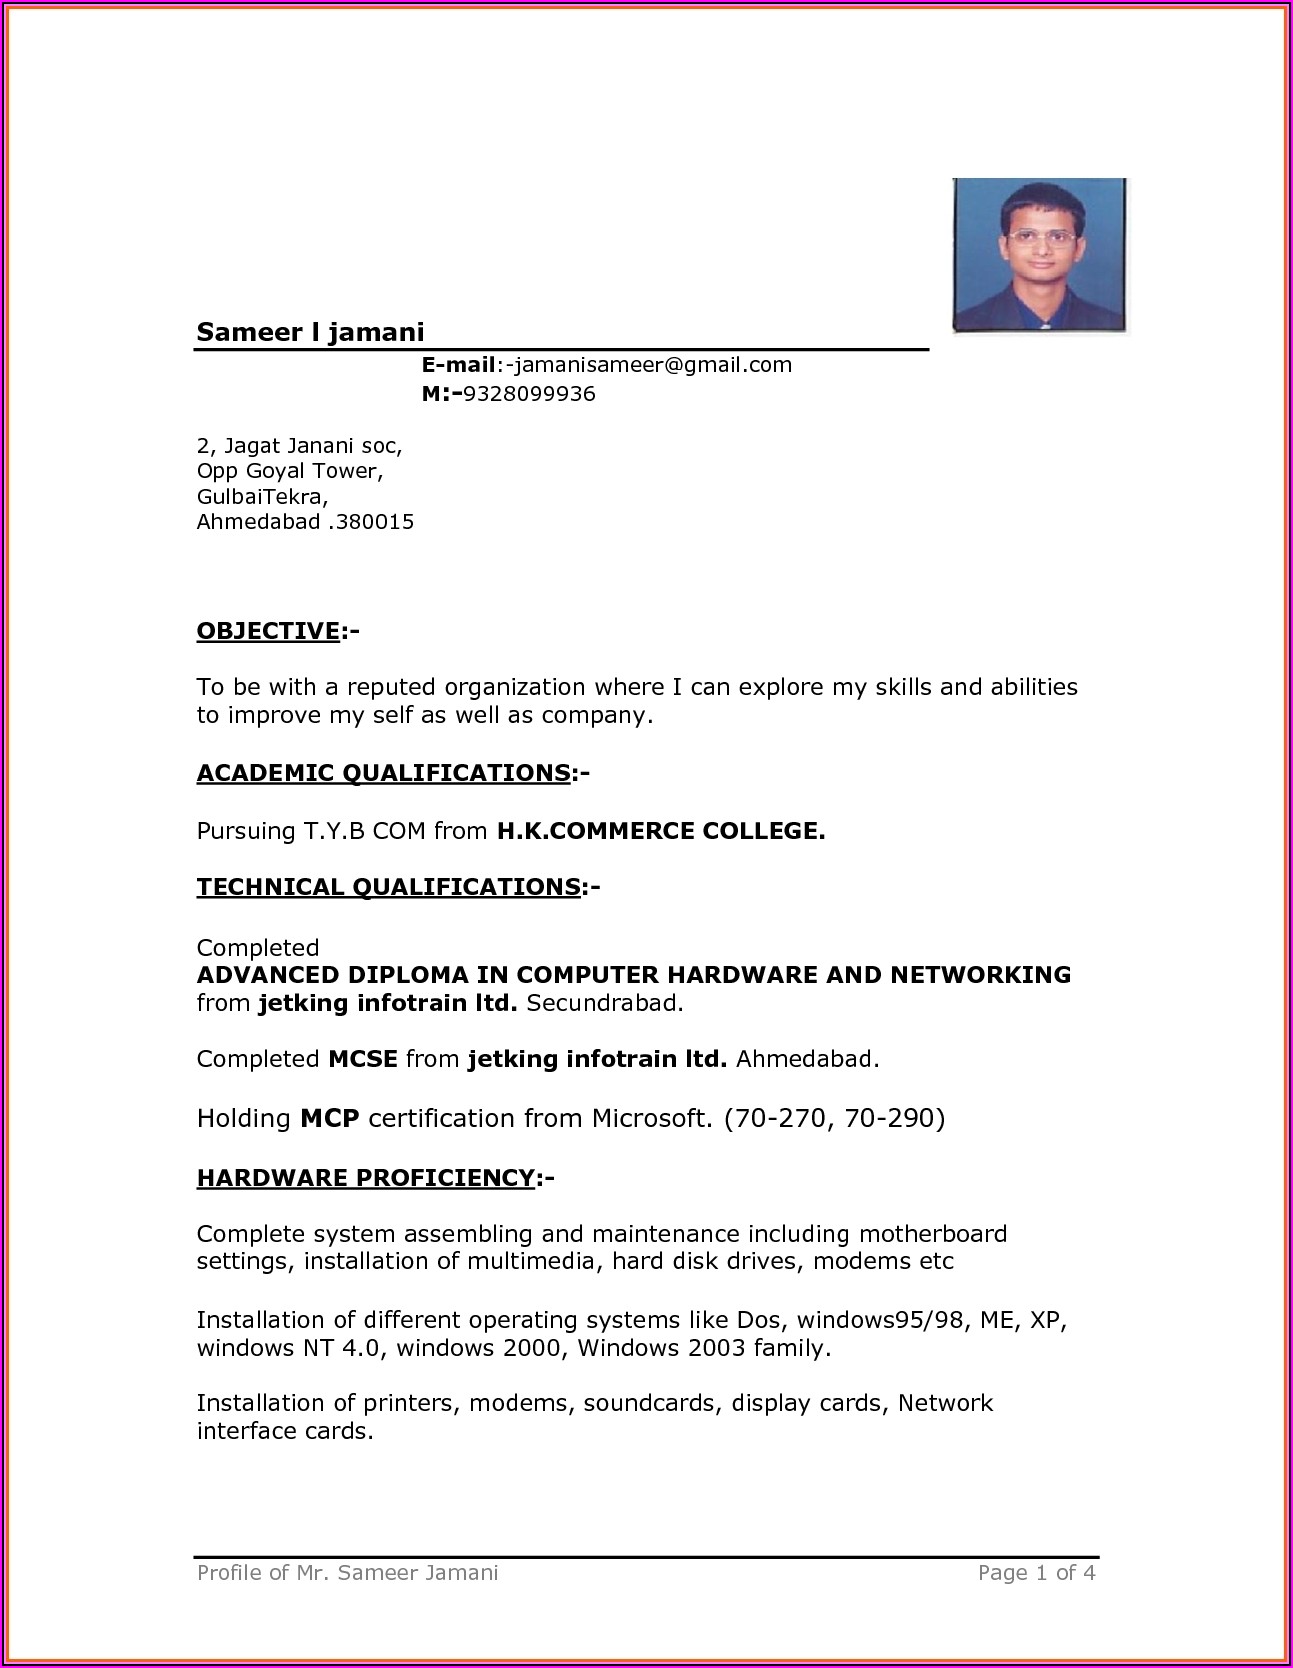 Professional Resume Format In Word